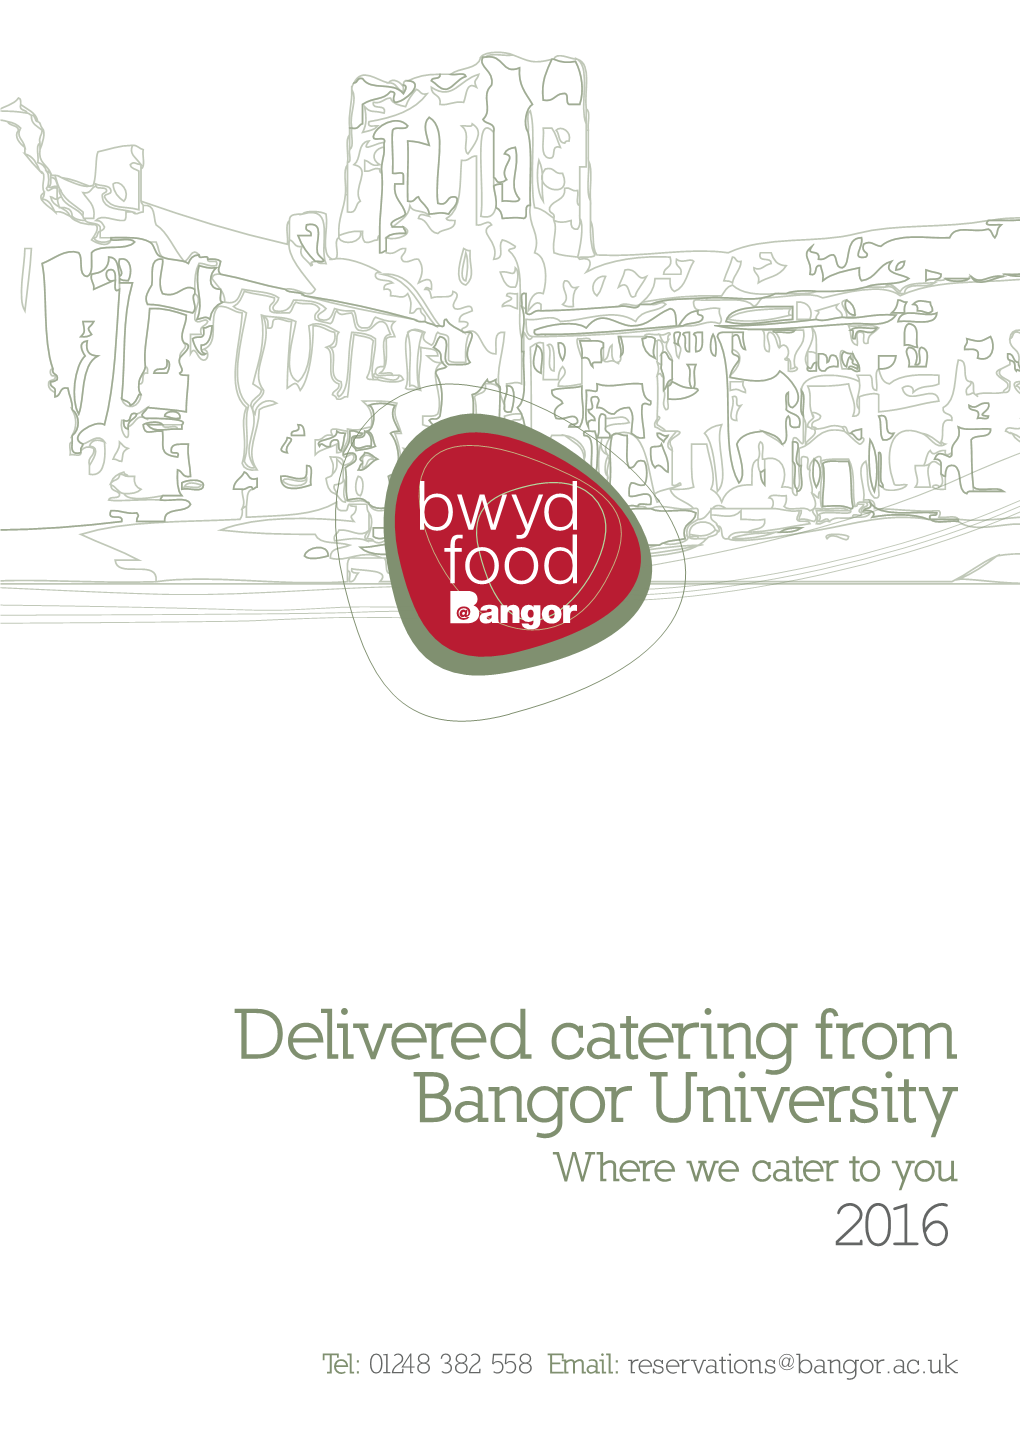 Delivered Catering from Bangor University Where We Cater to You 2016